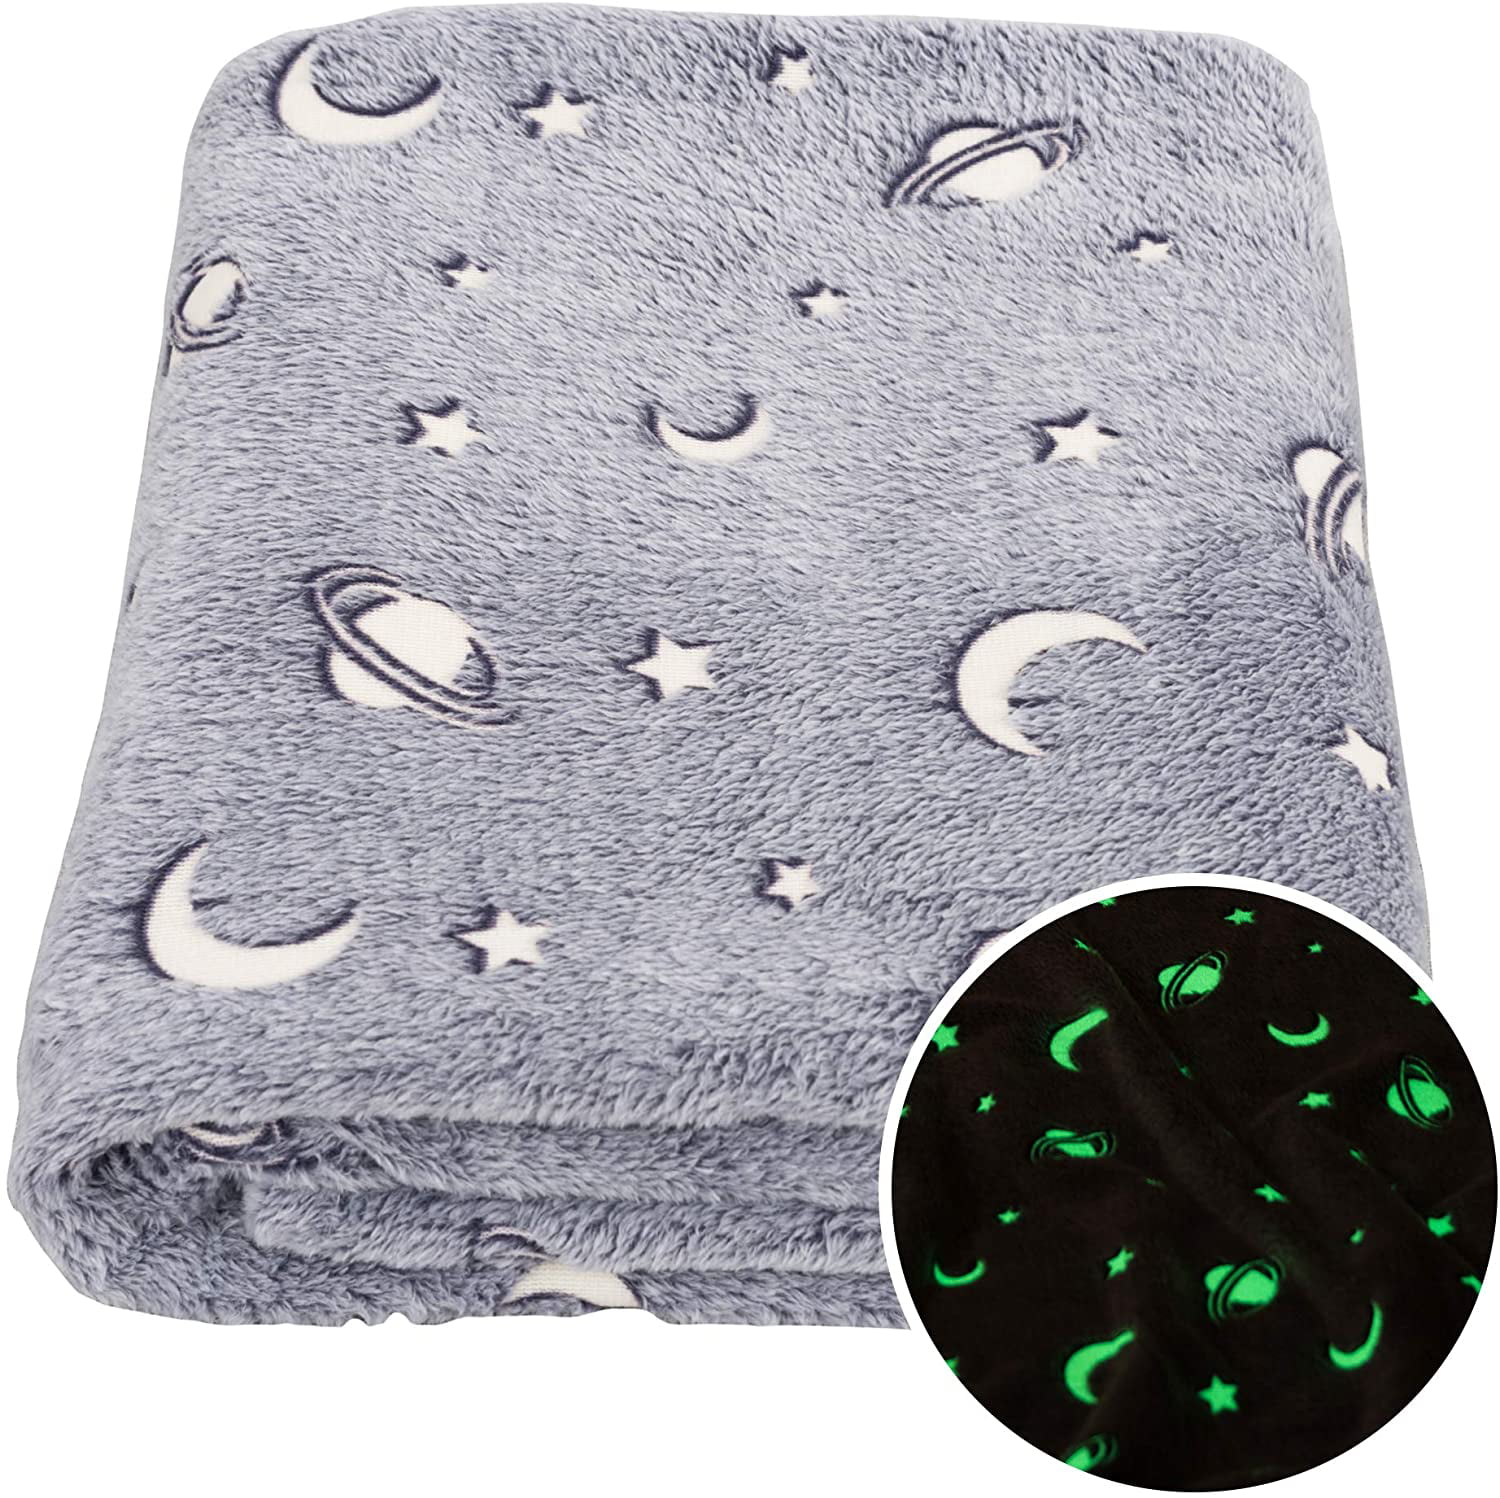 Details about   Brand New Life Comfort Printed Textured Oversized Plush Throw Blanket 60 x 70 in 